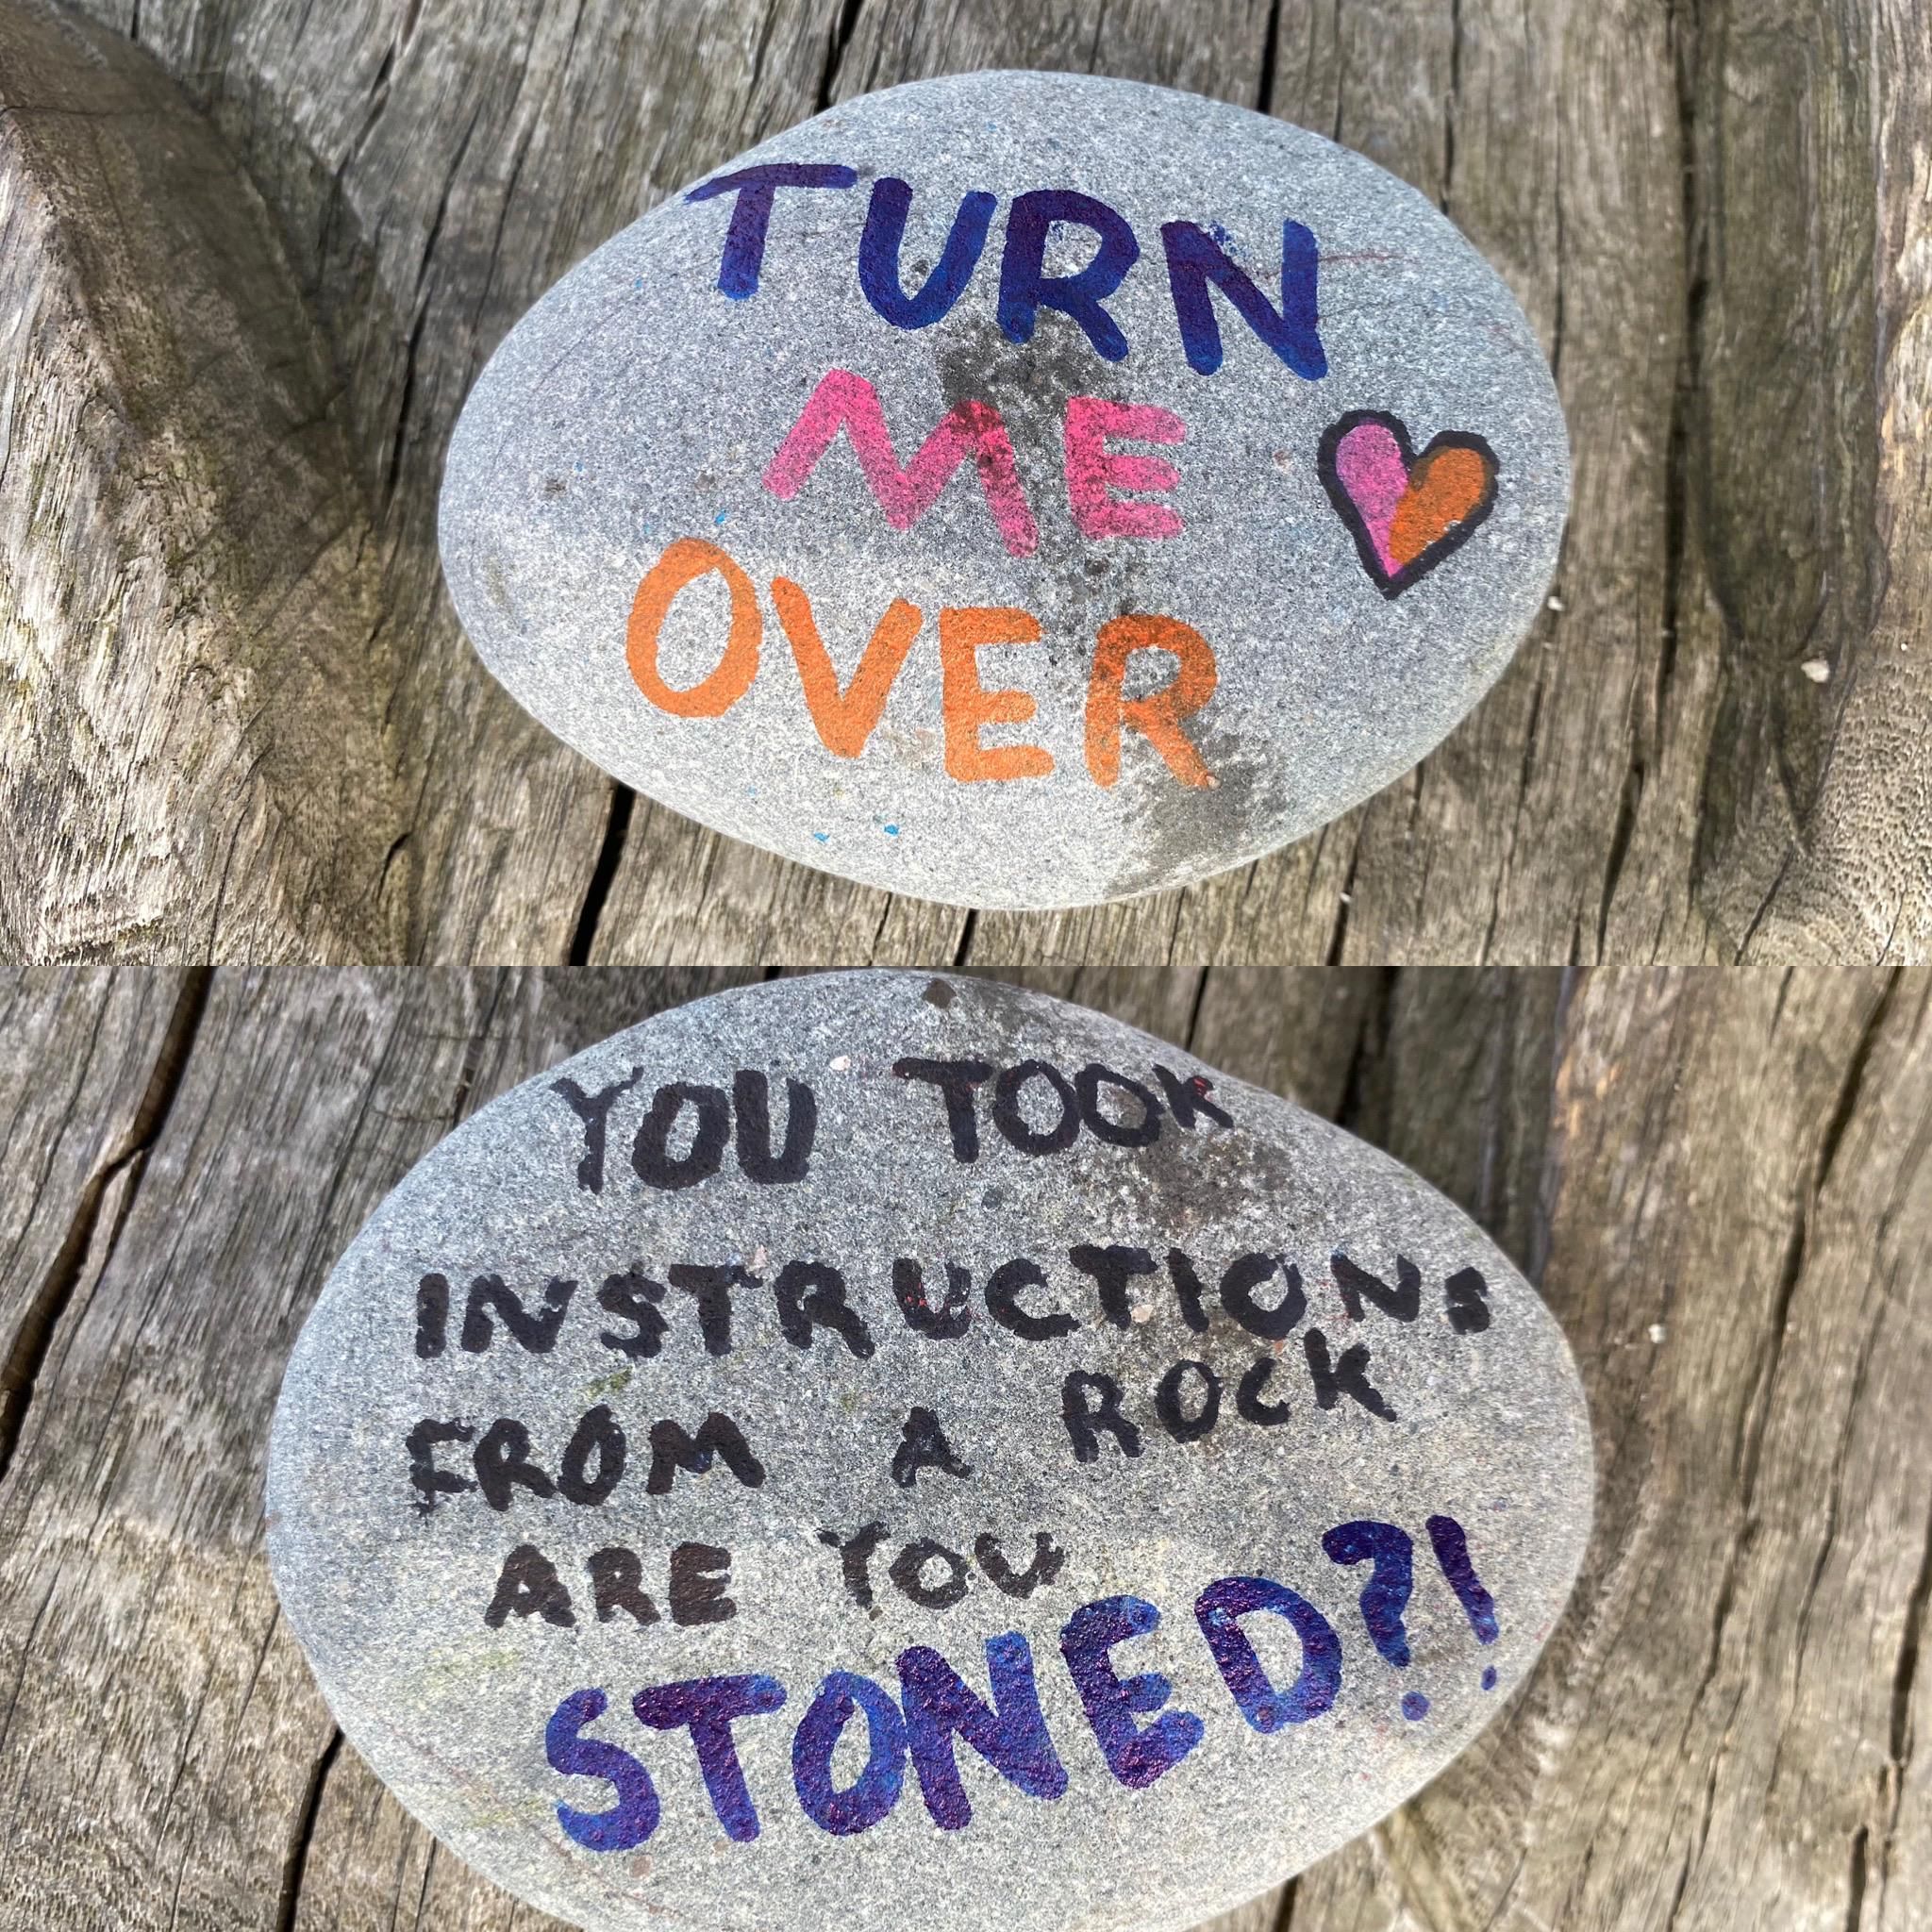 Found this on the park yesterday. I think this may have made me paranoid if I was stoned... but it made my day yesterday!